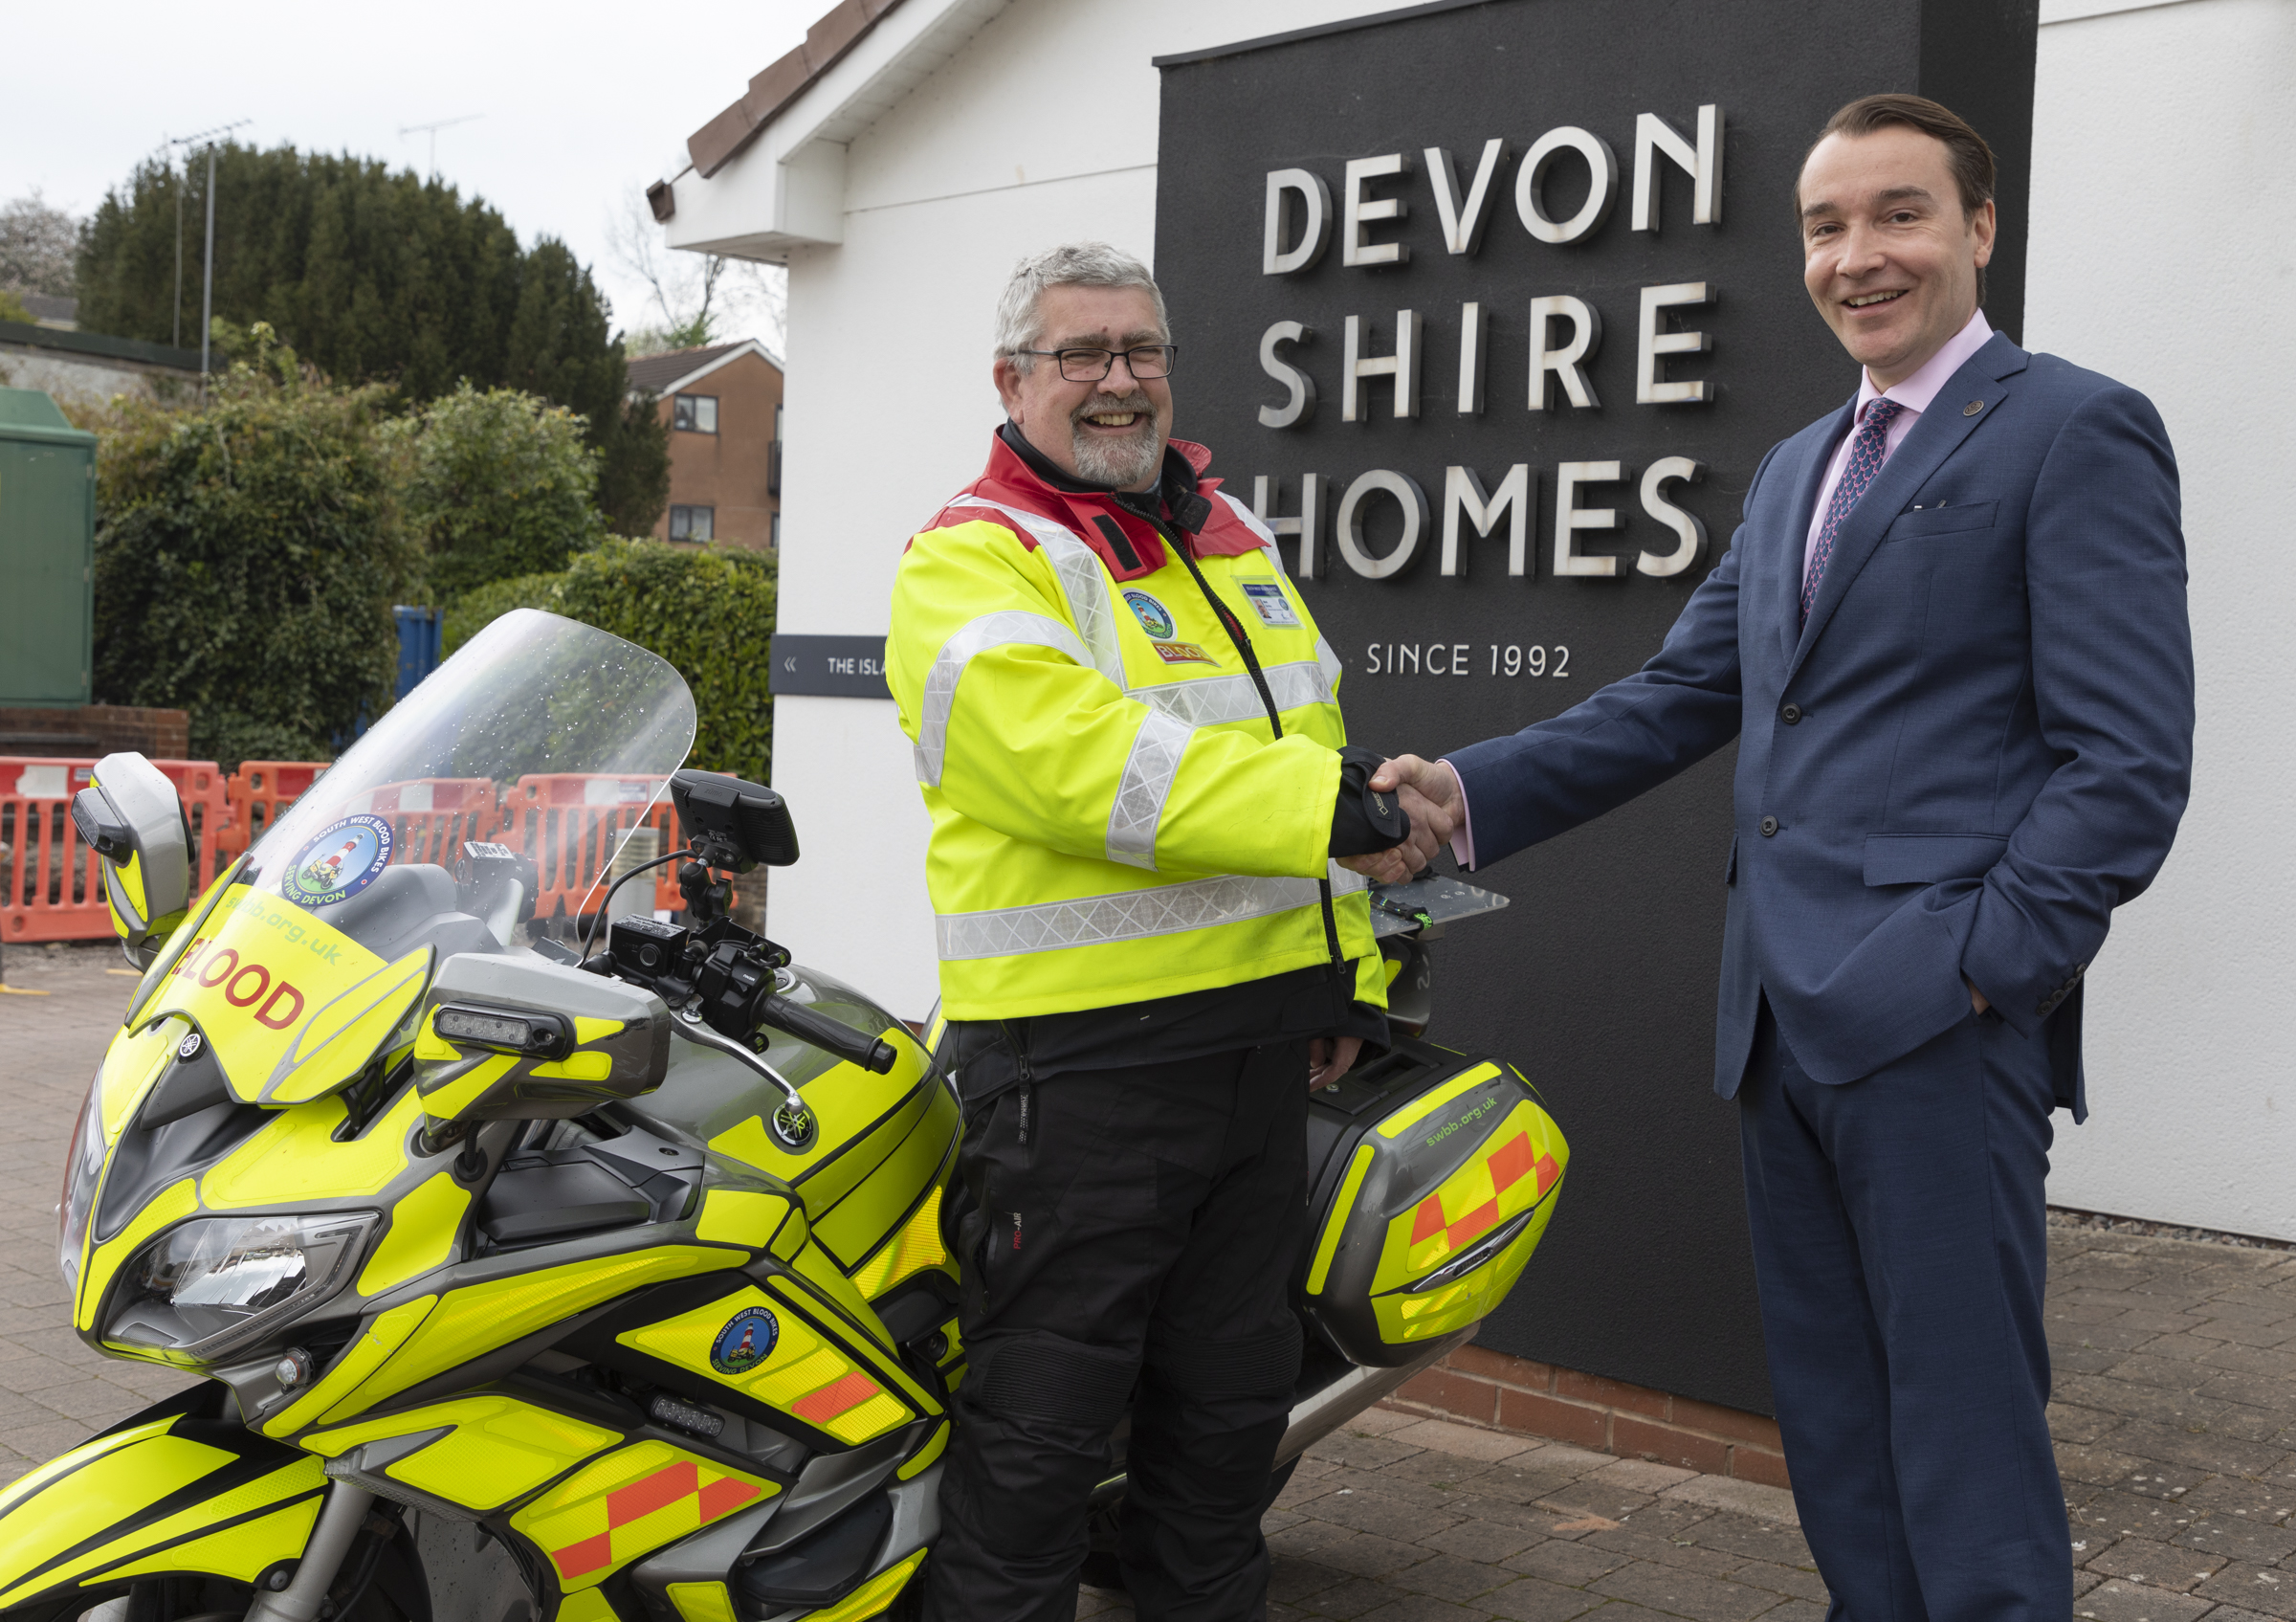 Devonshire Homes Marks 30th Anniversary with Charity Partnership